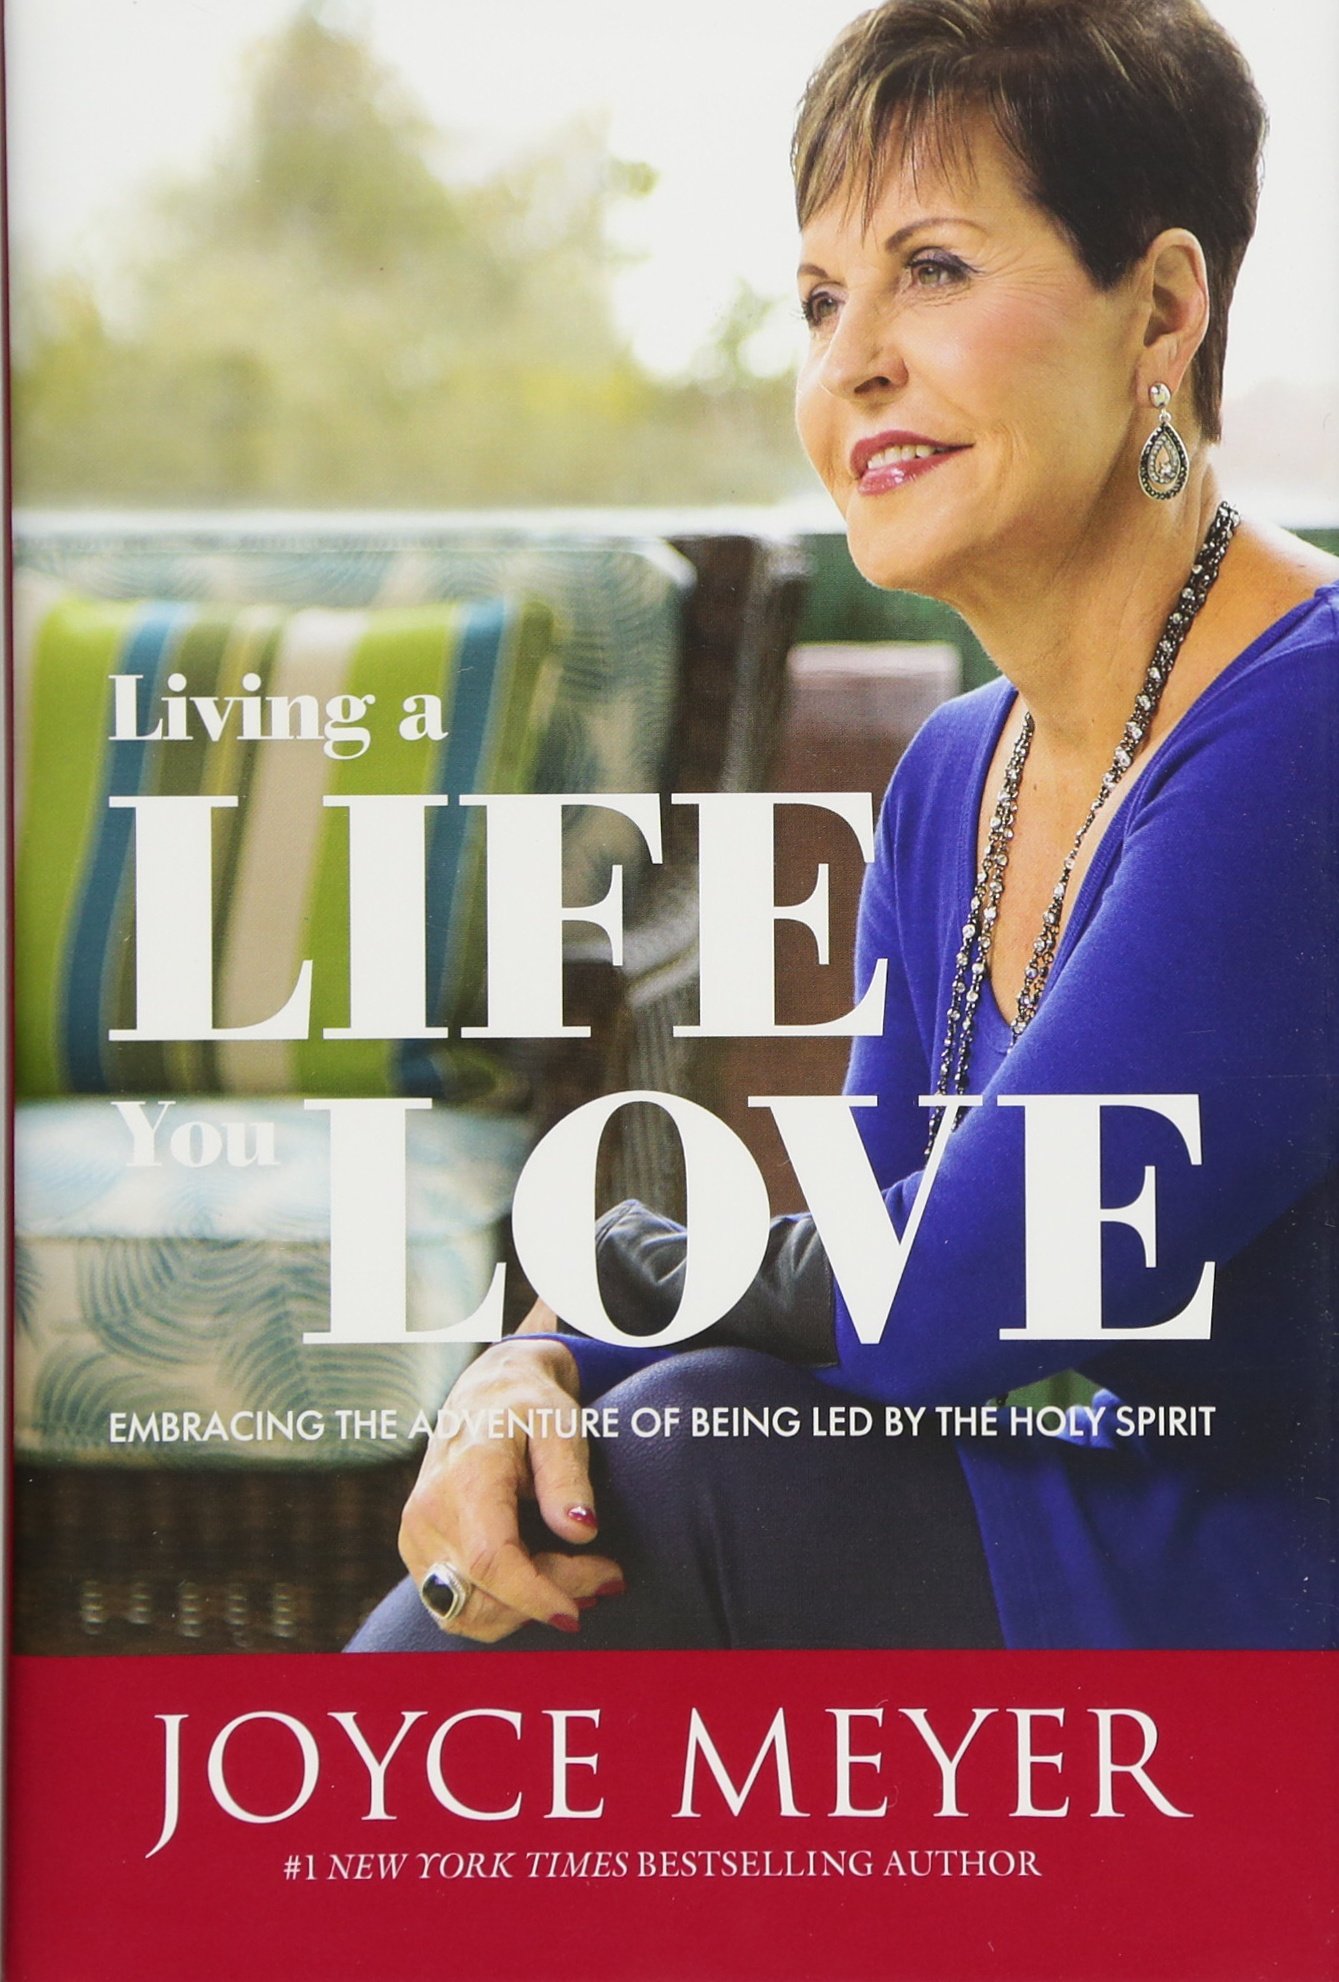 Image for "Living a Life You Love "